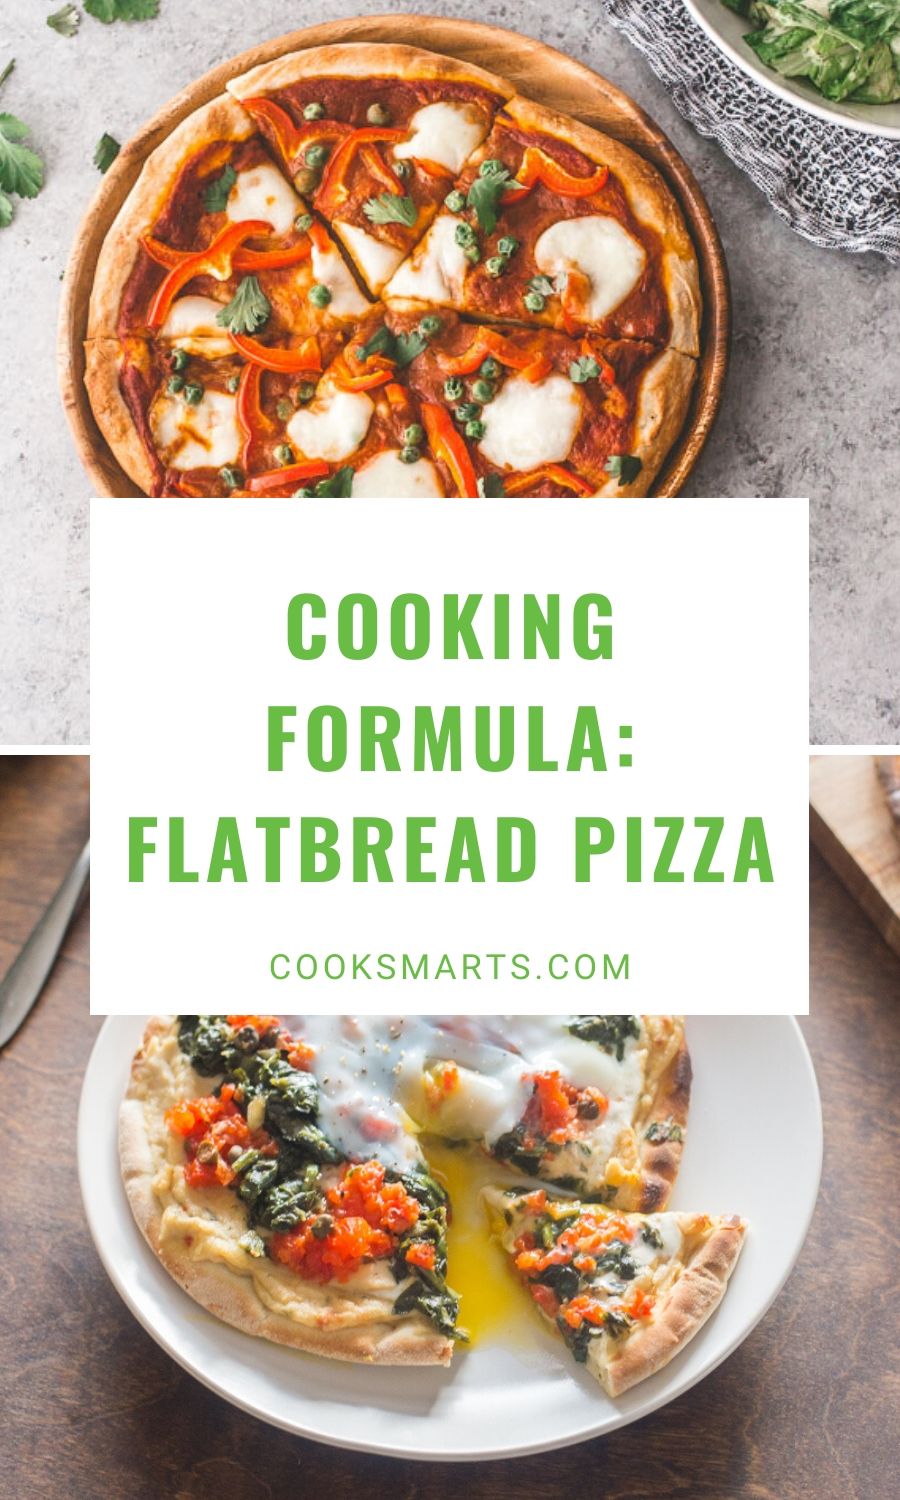 How to Make Flatbread Pizza | Cook Smarts